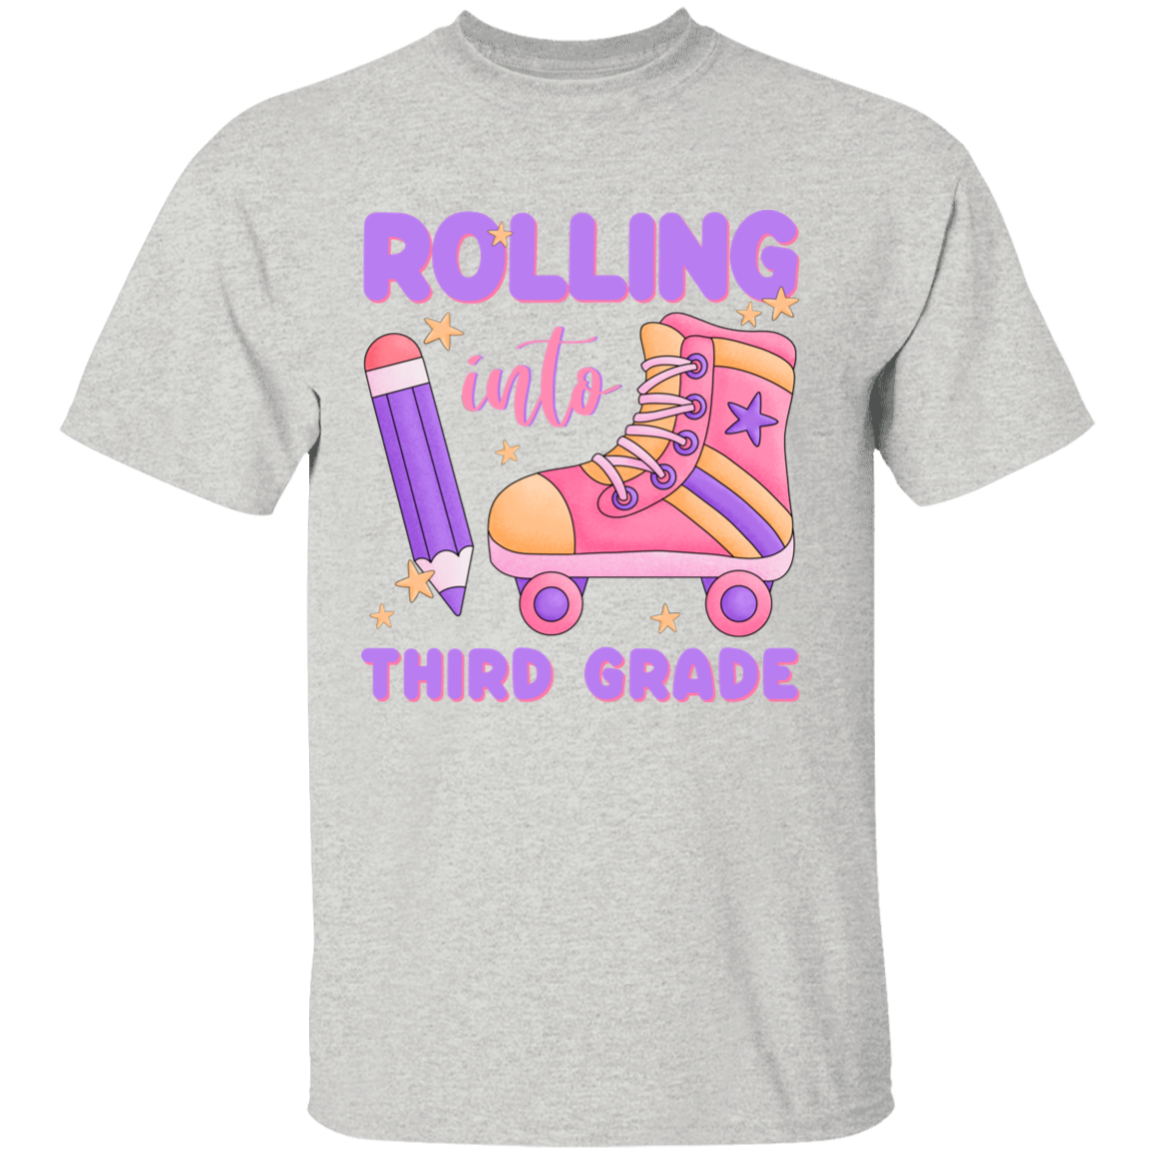 Rolling into Third Grade Youth Cotton T-Shirt